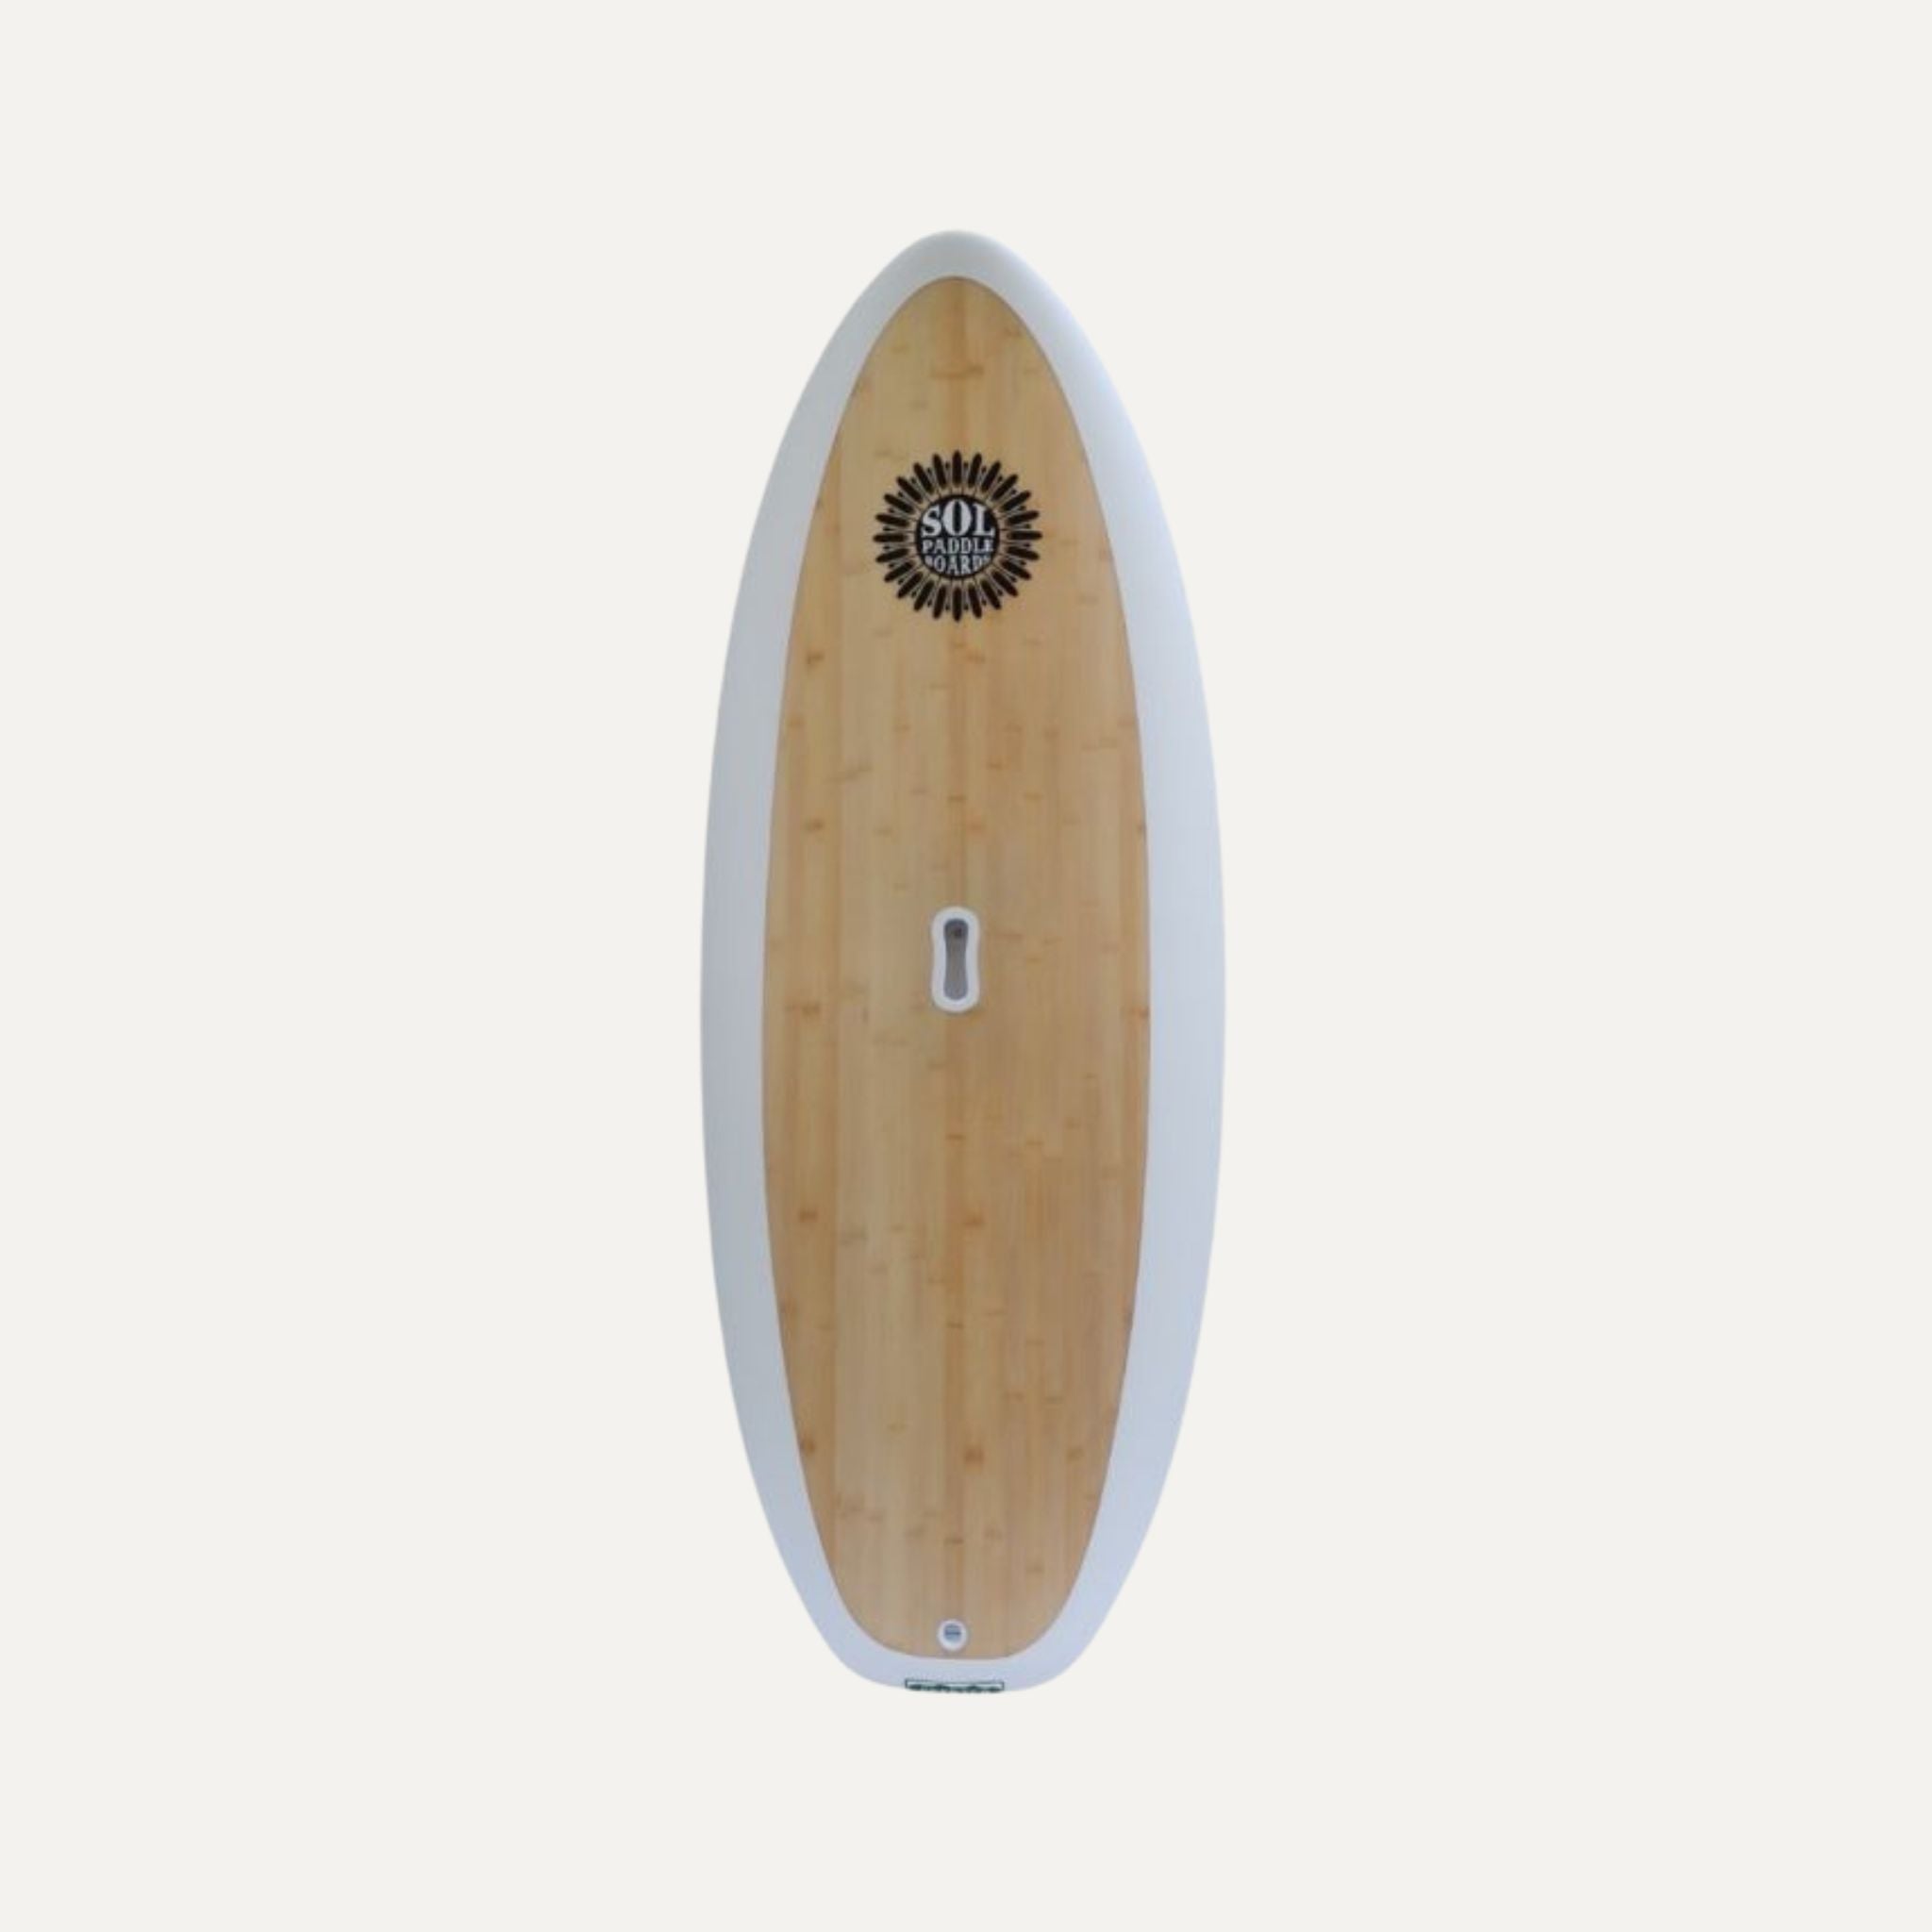 Top view of the SOL Paddle Boards' SOLscepterXL Epoxy Prone River Surfboard featuring a sleek, oval-shaped design with a light wood finish and a white border. The board has a central handle slot and the SOL Paddle Boards logo near the top end.